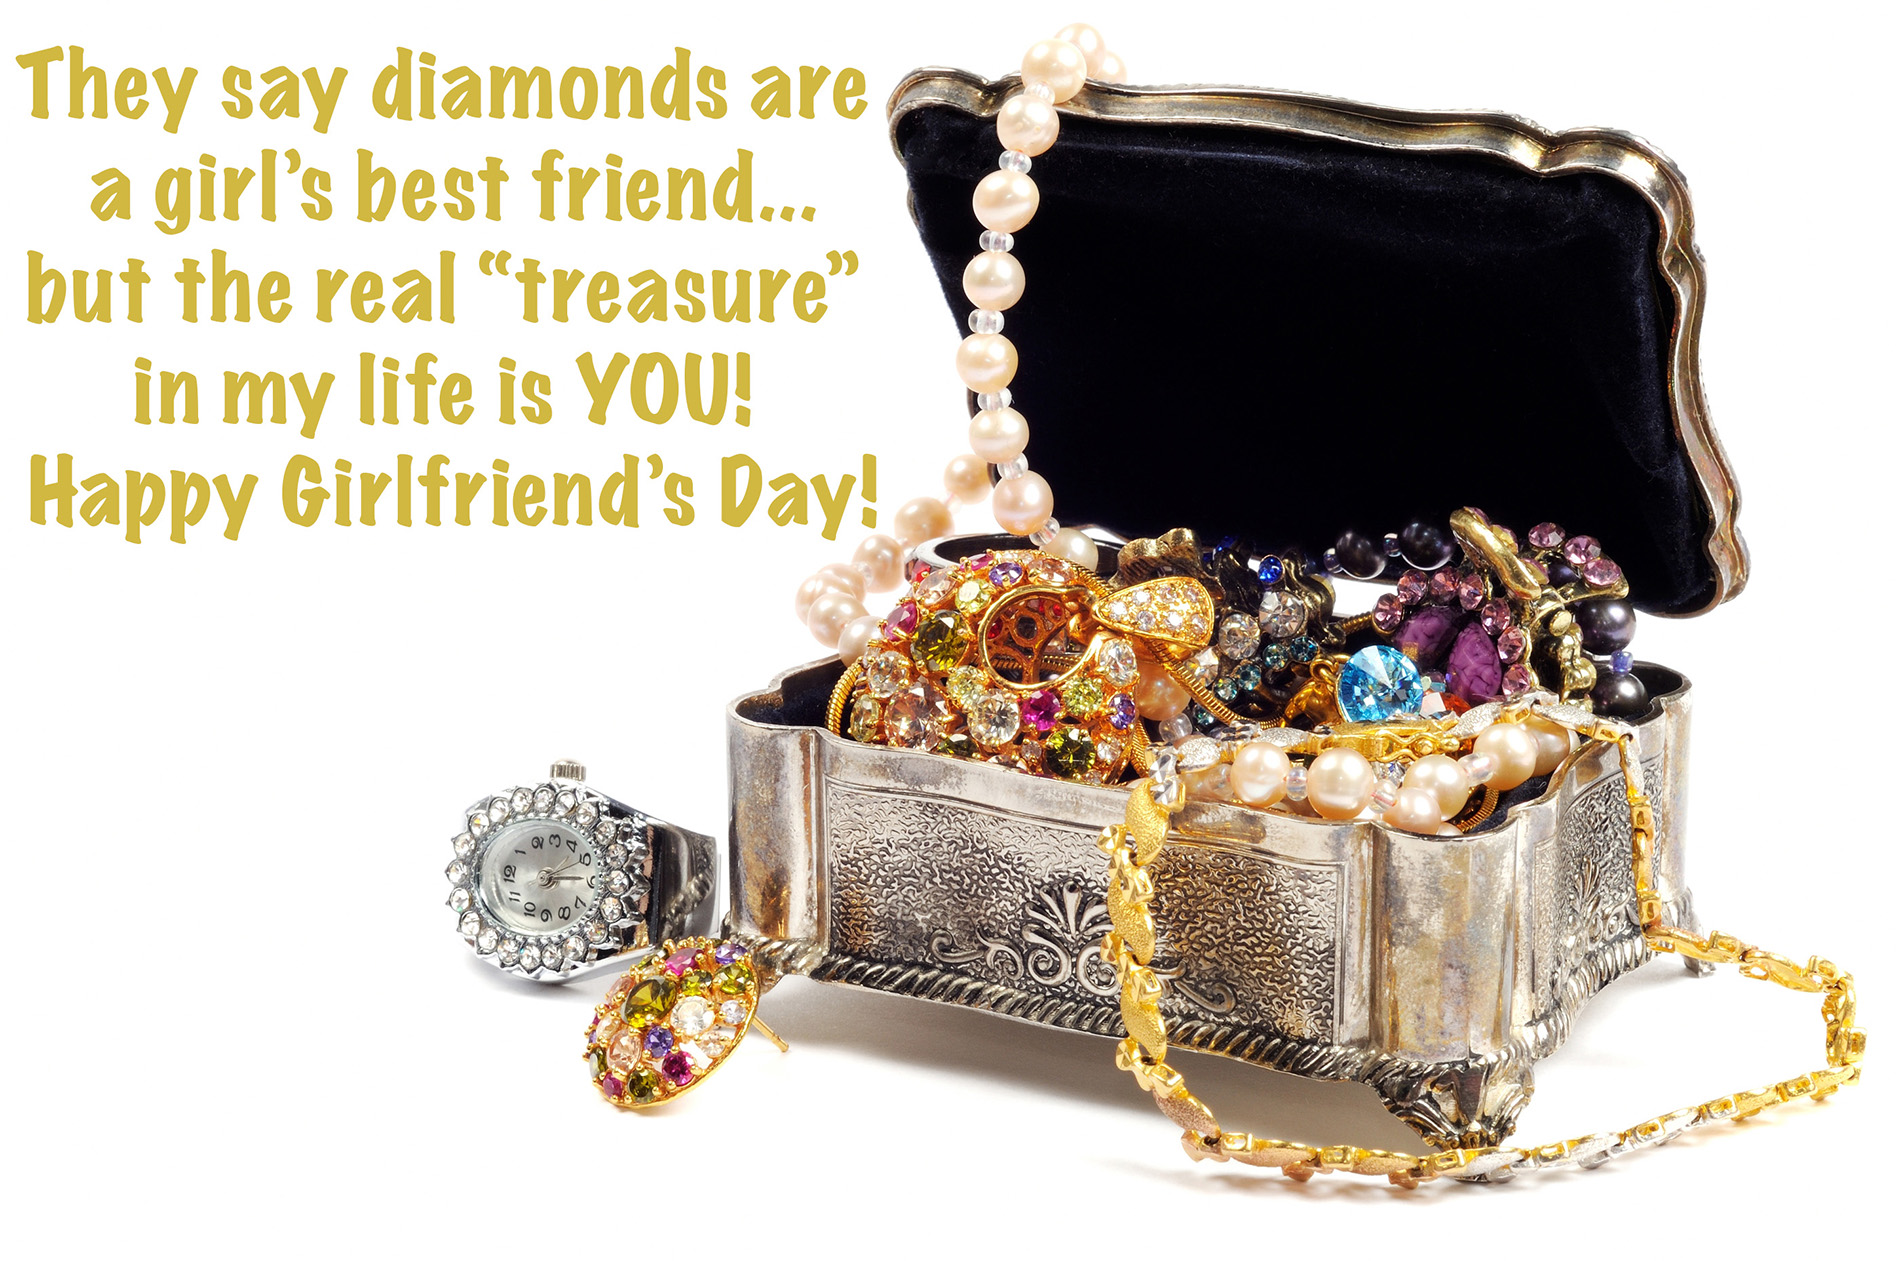 they say diamonds are a girls best friend National Girlfriends Day